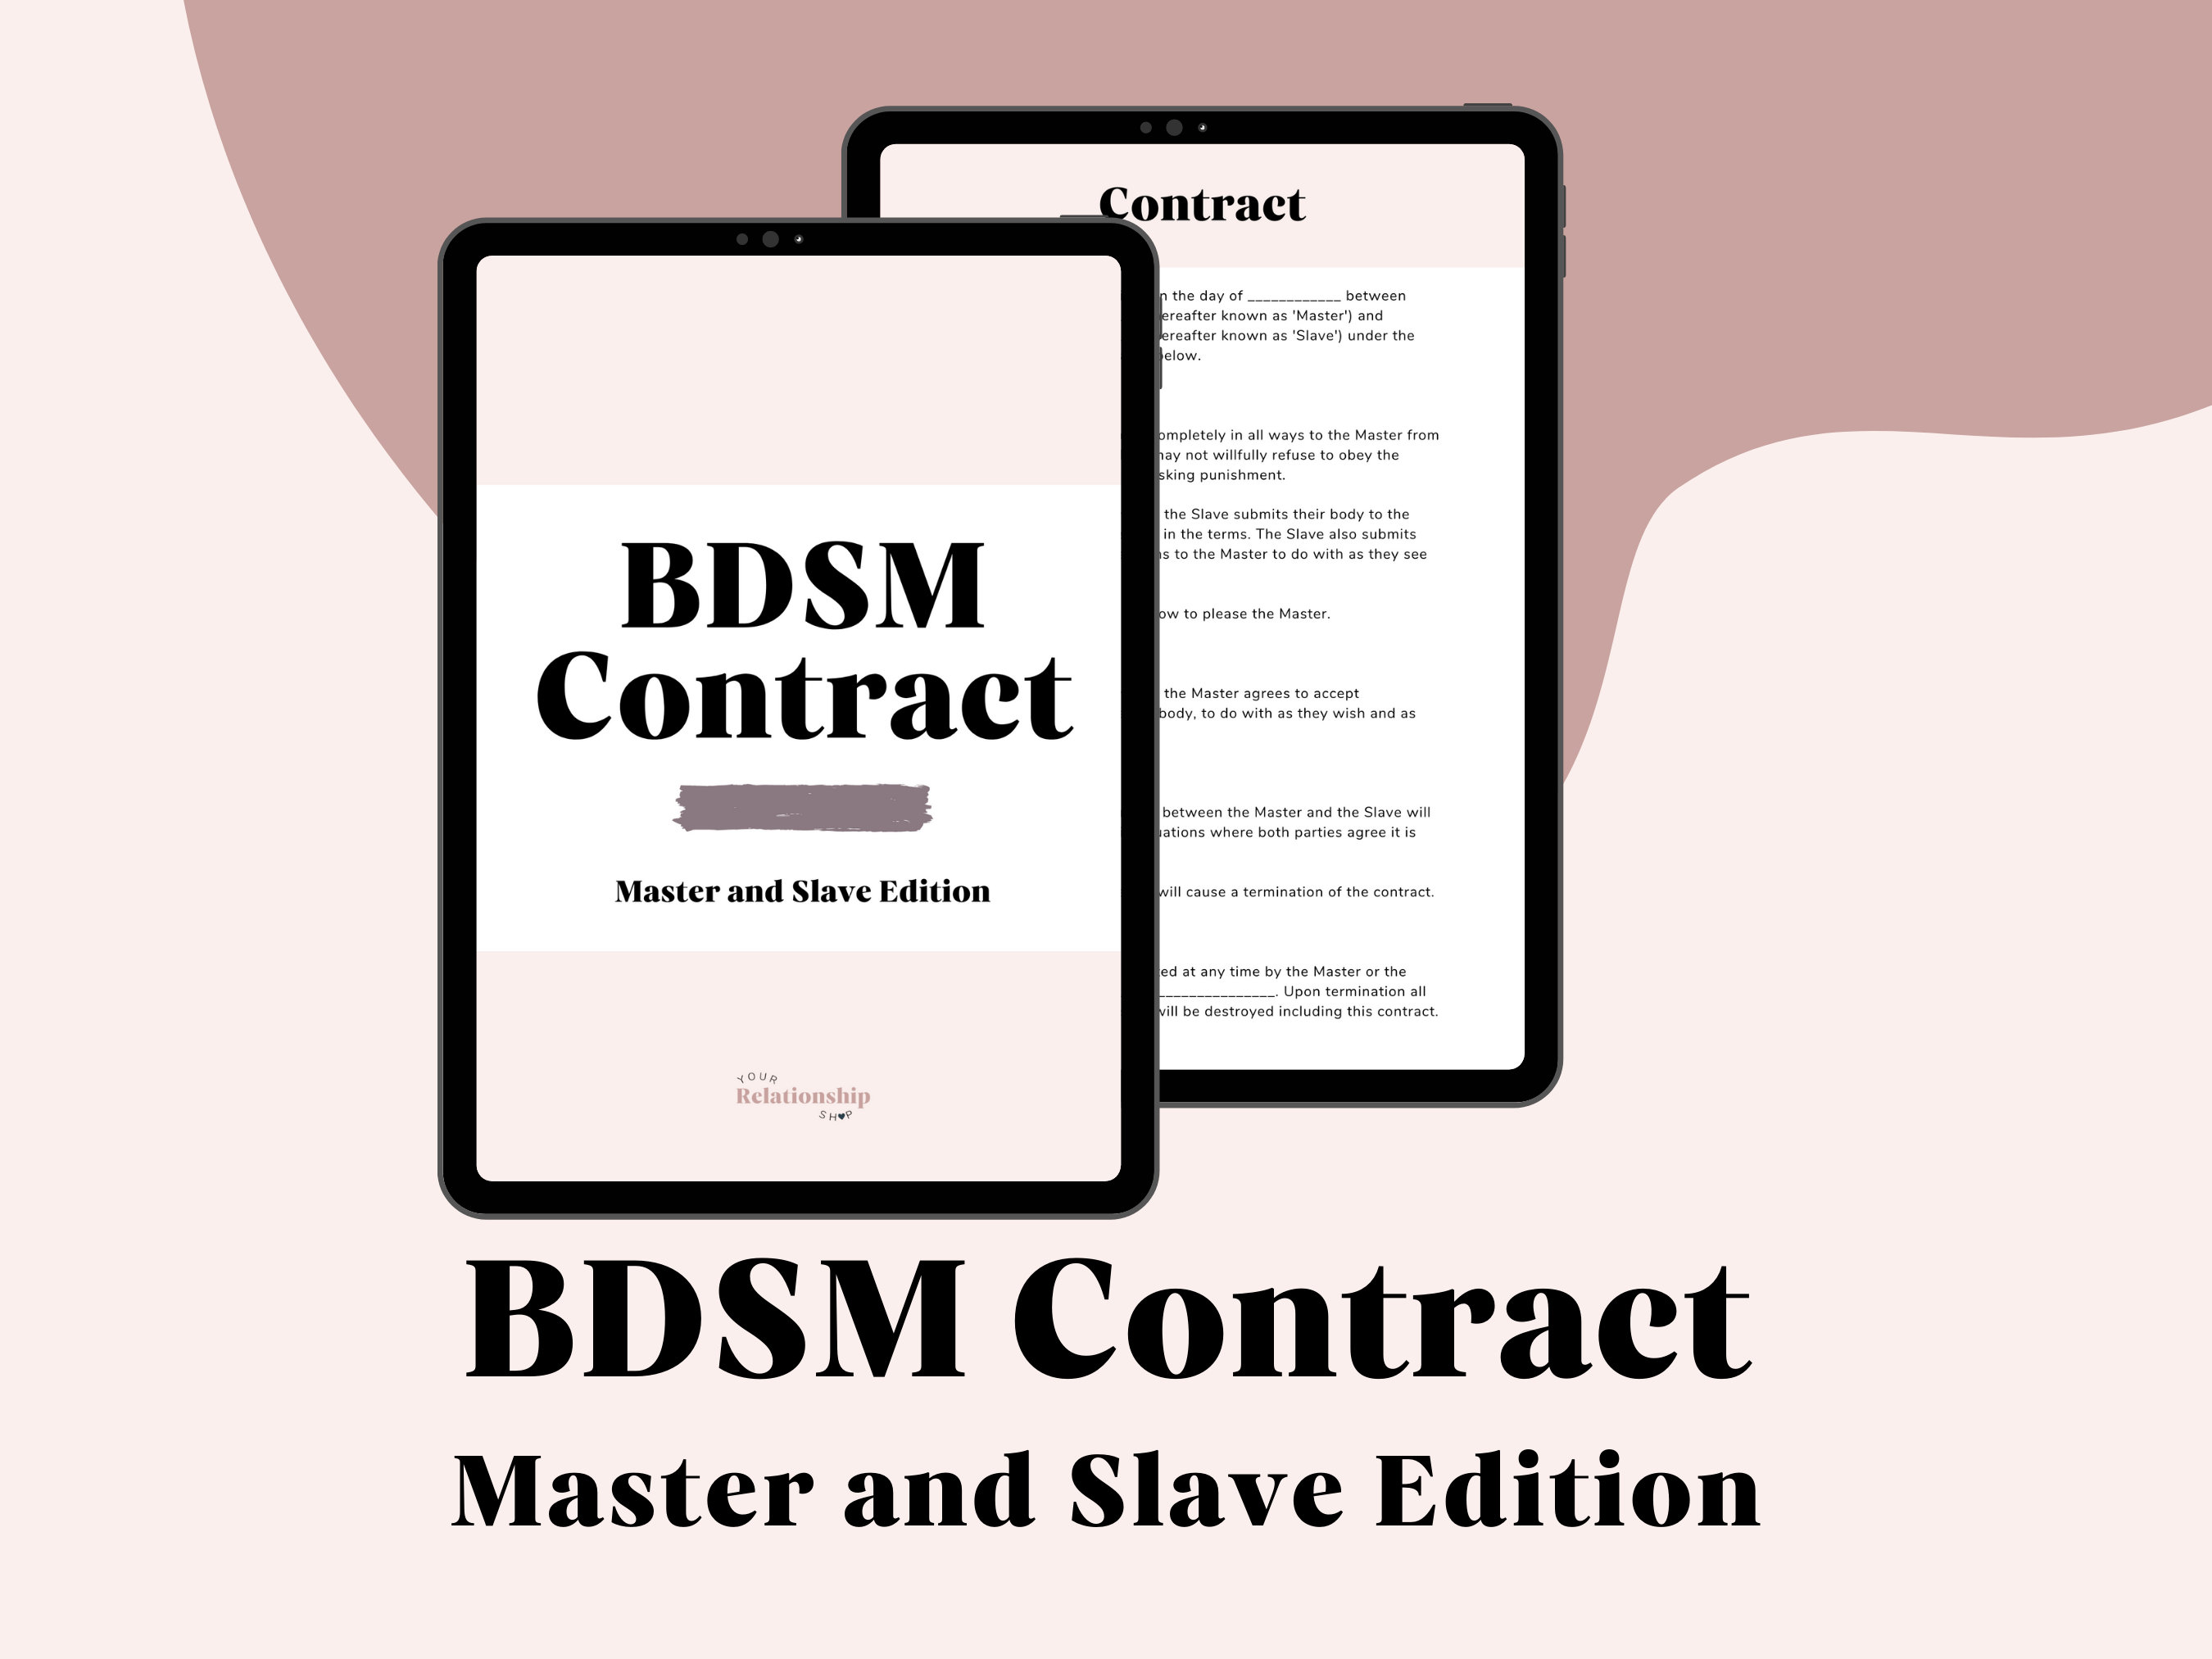 Bdsm Contract for Master and Slave Bdsm Certificate BDSM image photo